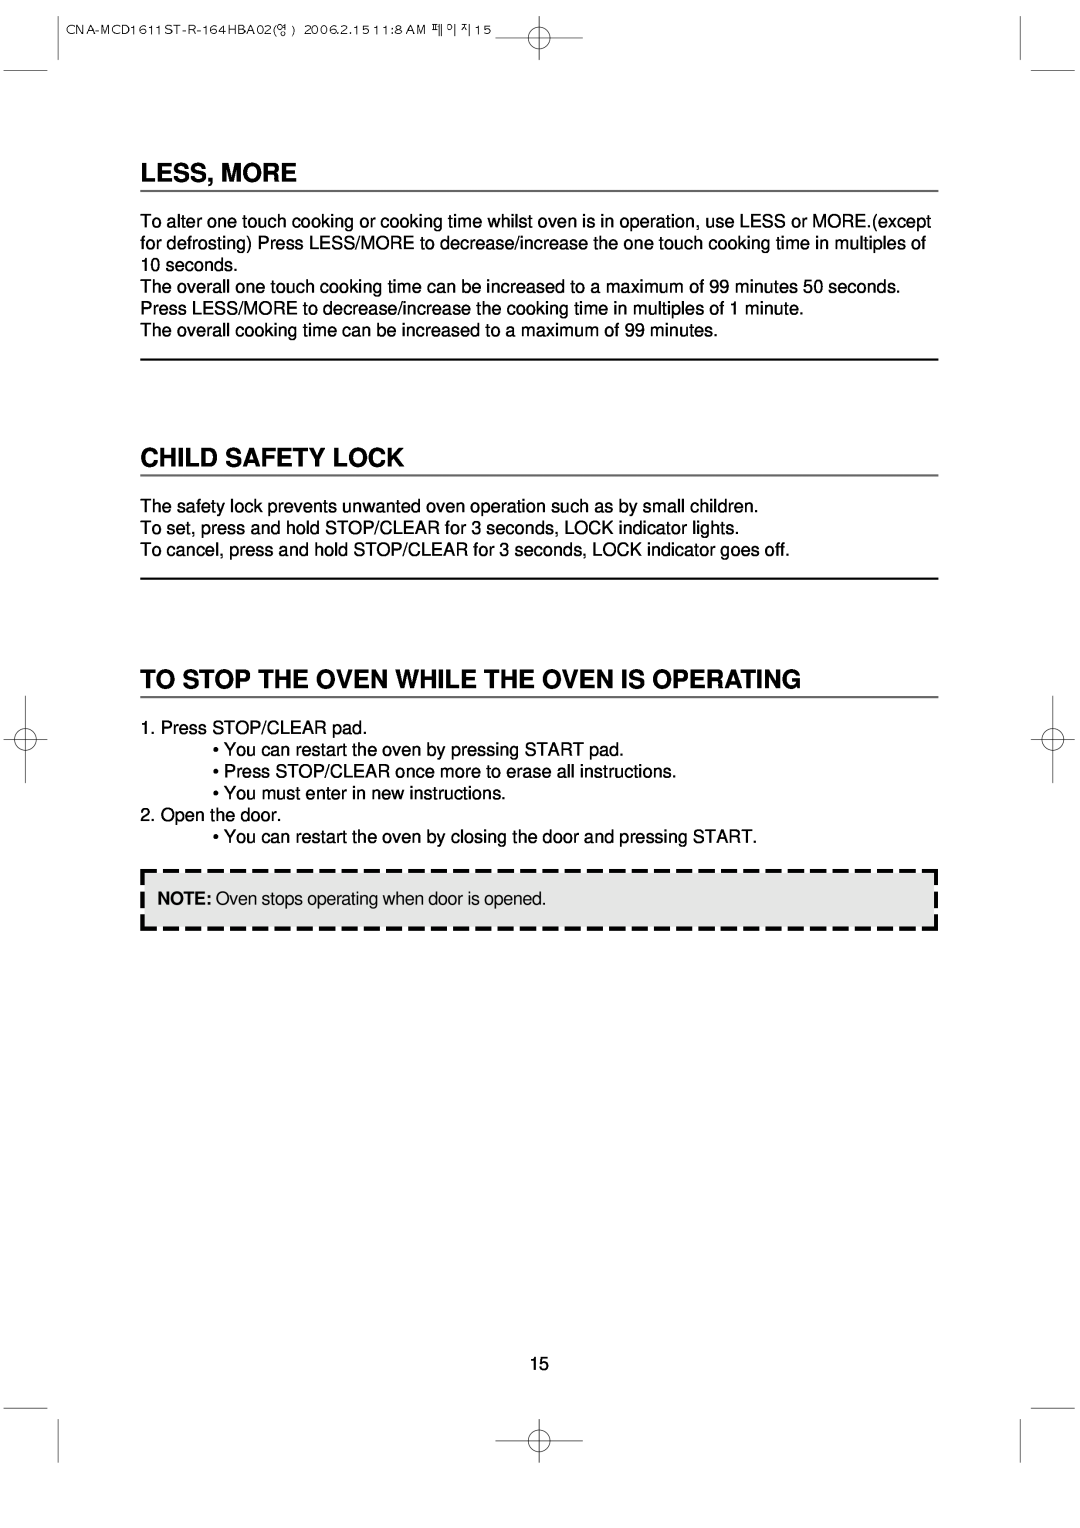 Magic Chef MCD1611ST manual Less, More, Child Safety Lock, To Stop The Oven While The Oven Is Operating 